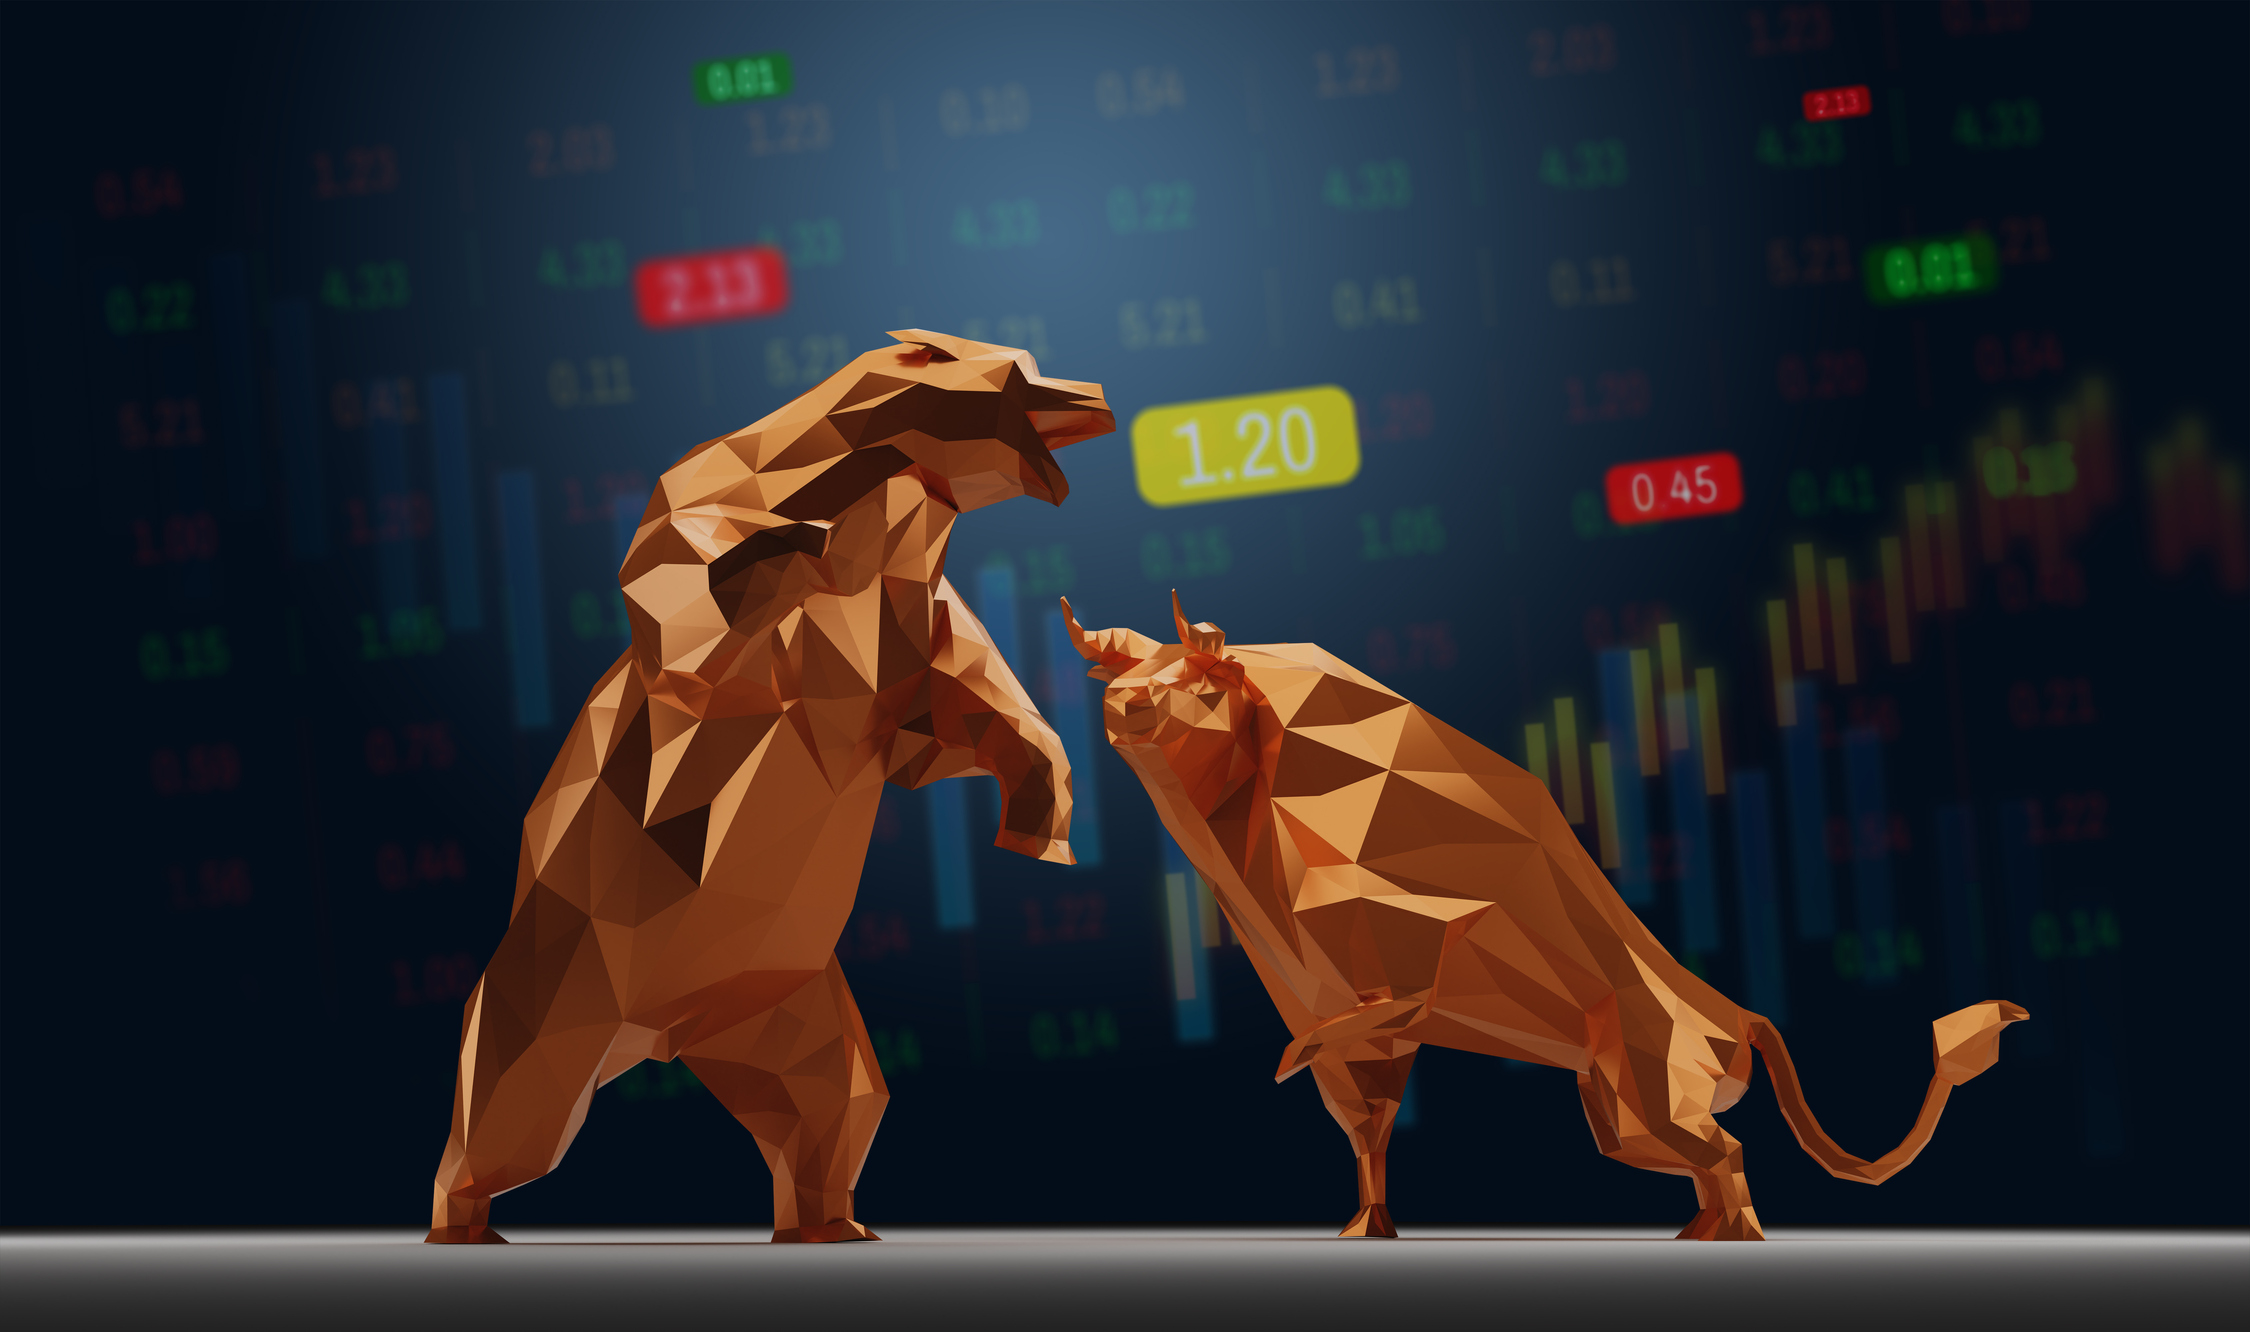 Will April Bring Bulls or Bears to the Stock Market?